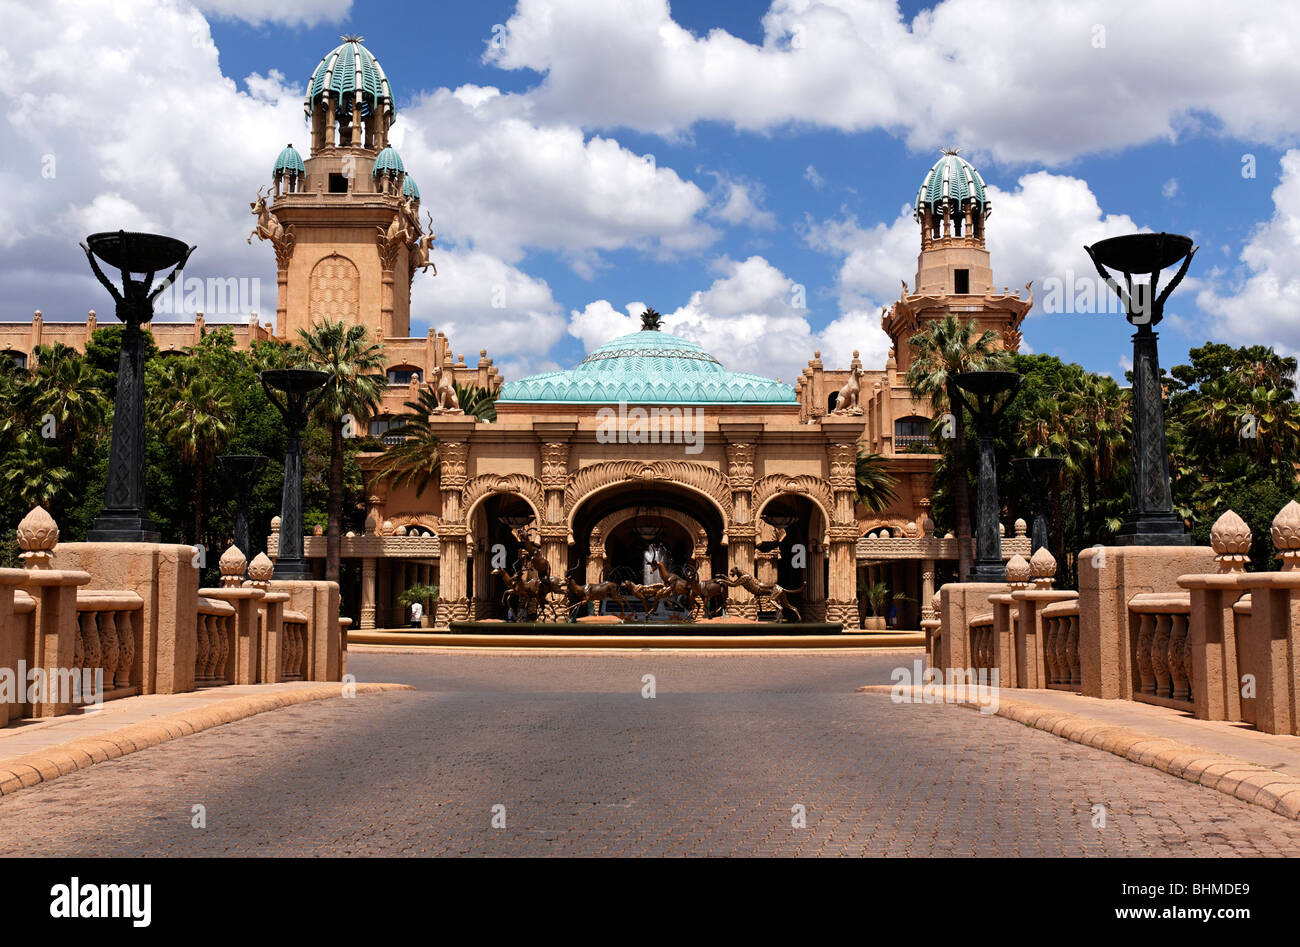 Palace of the Lost City Hotel Suncity Northwest Province South Africa Stock Photo